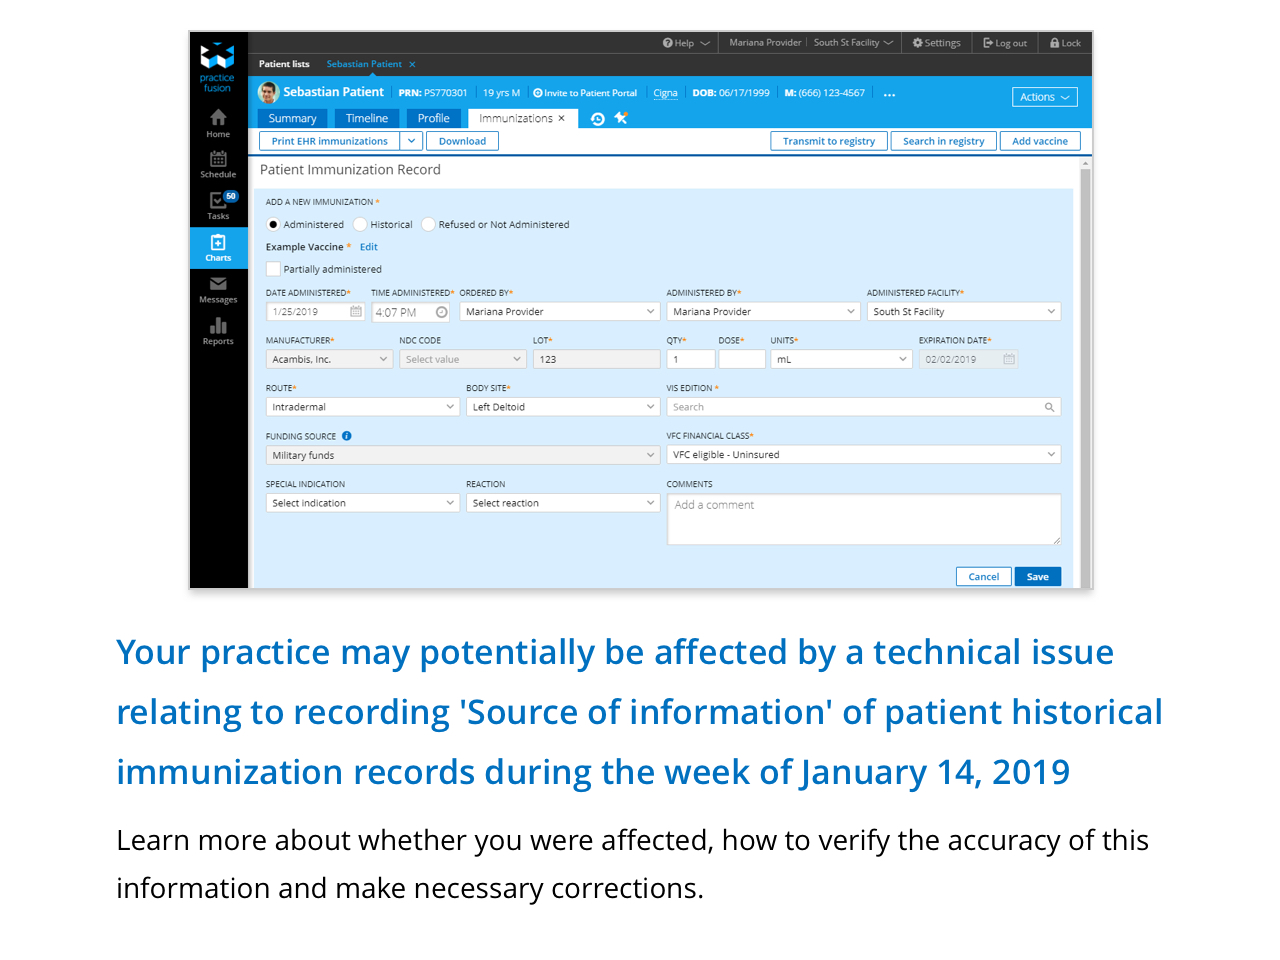 Your practice may potentially be affected by a technical isue relating to recording 'Source of information' of patient histroical immunization records during the week of January 14, 2019